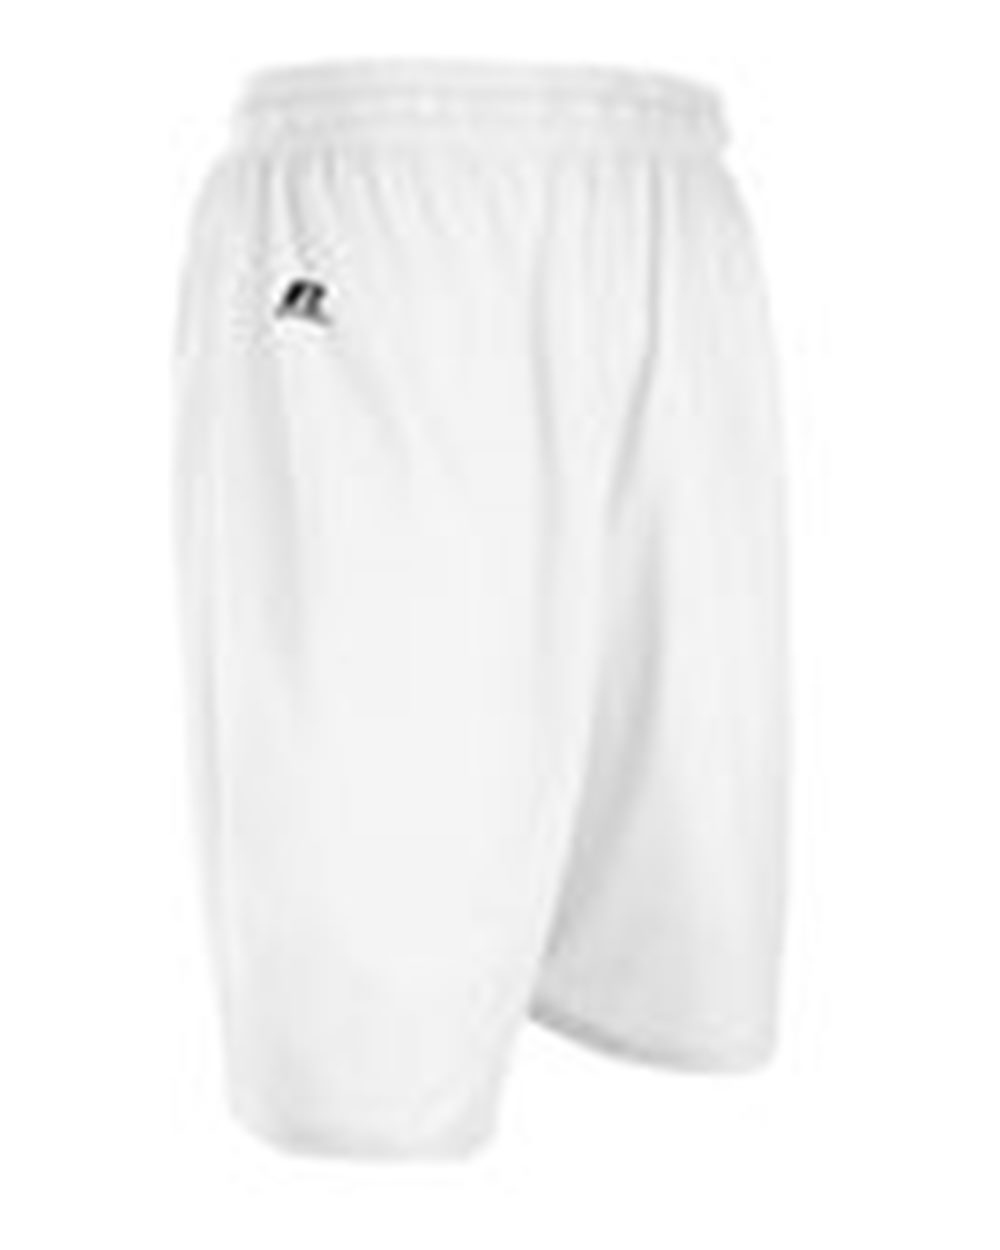 9" Dri-Power® Tricot Mesh Shorts 659AFM Details about   Russell Athletic